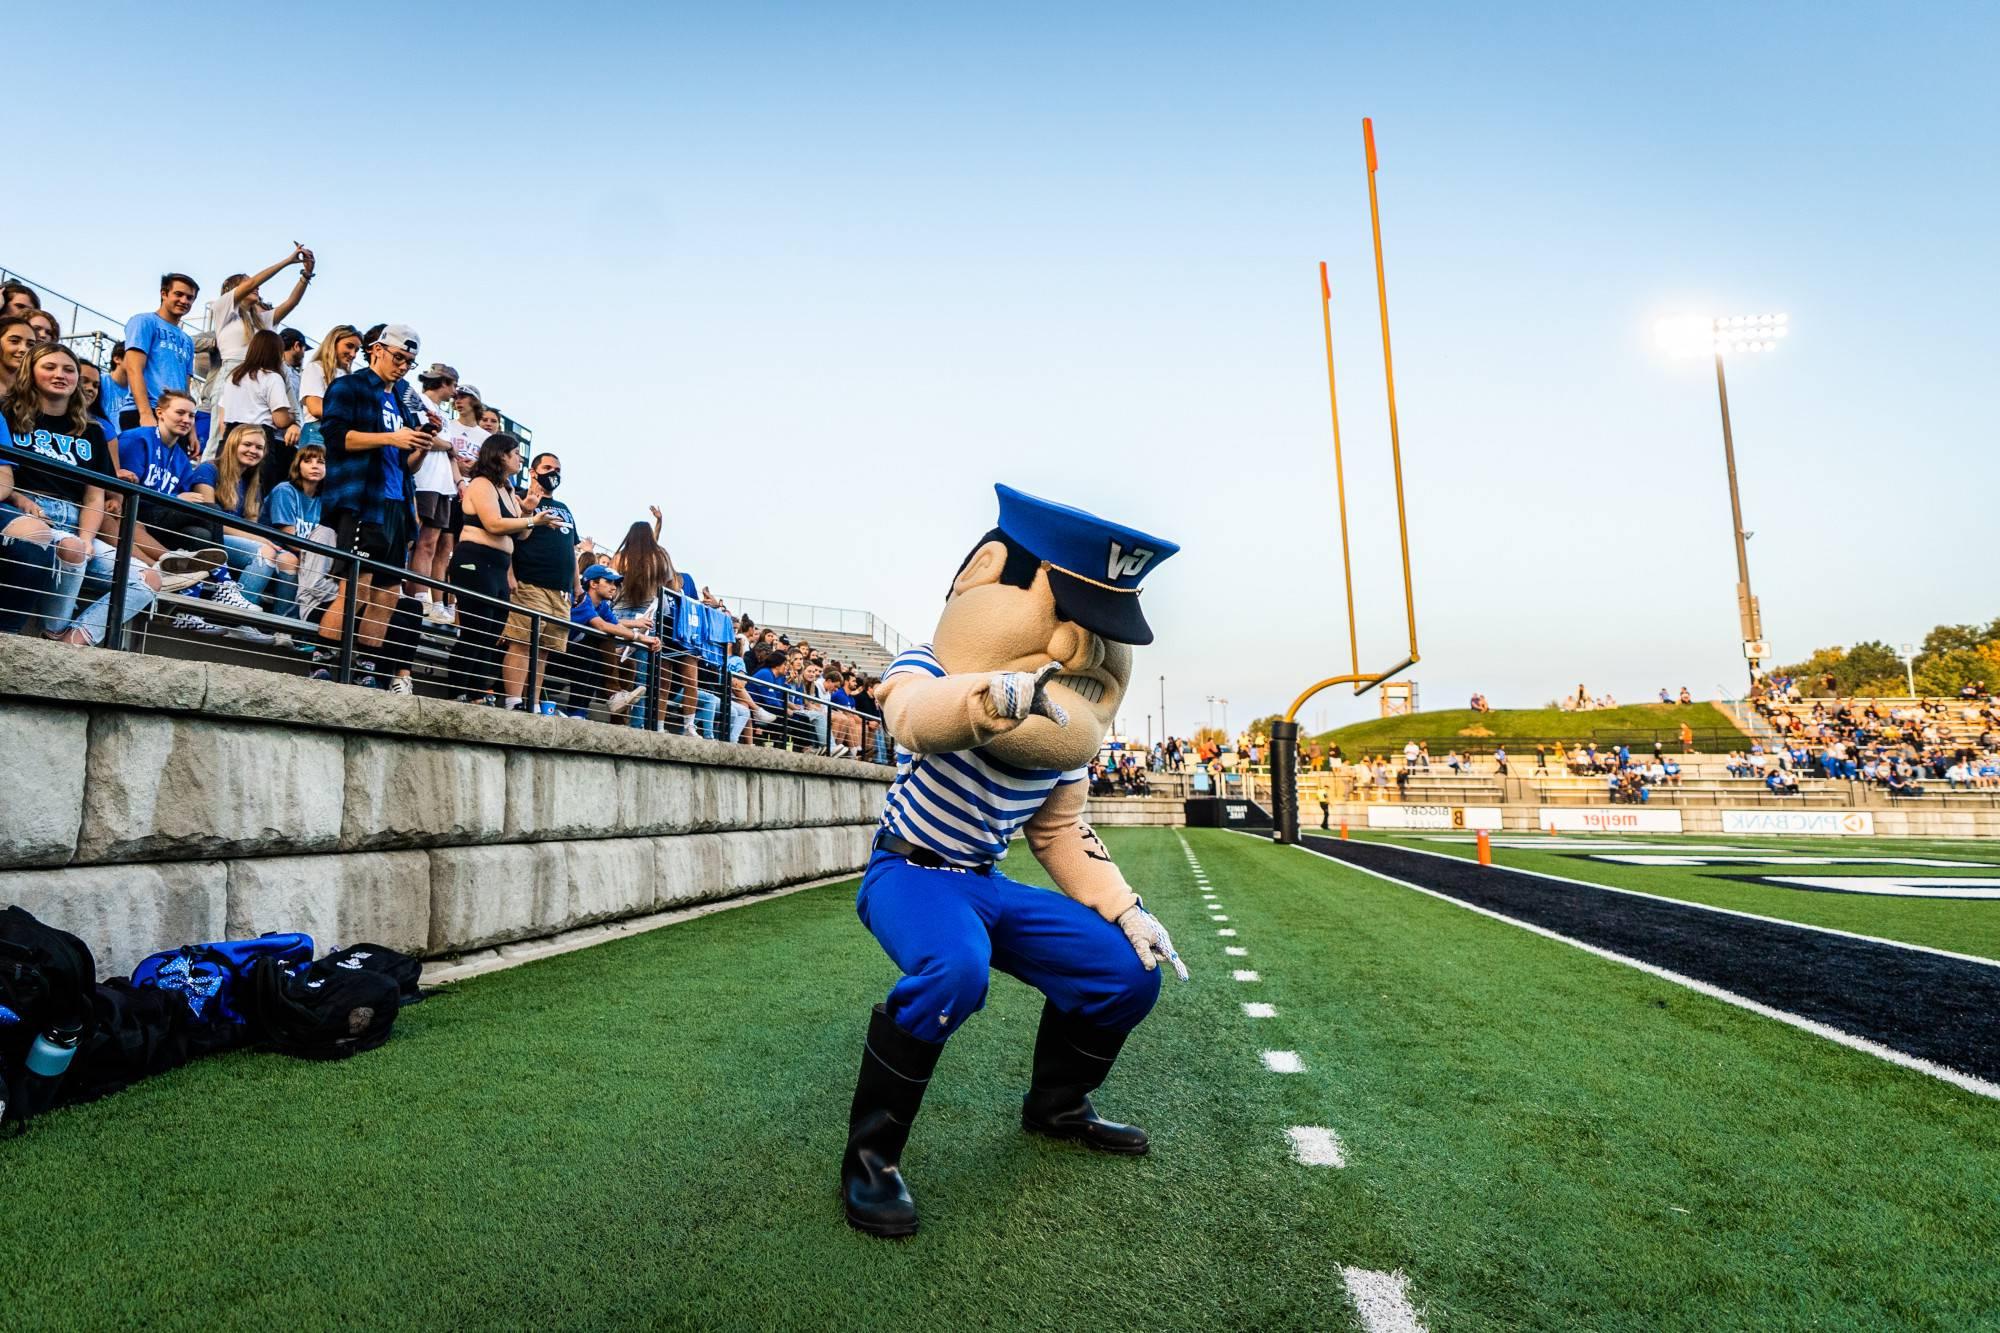 Louie points at camera during GVSU Football game